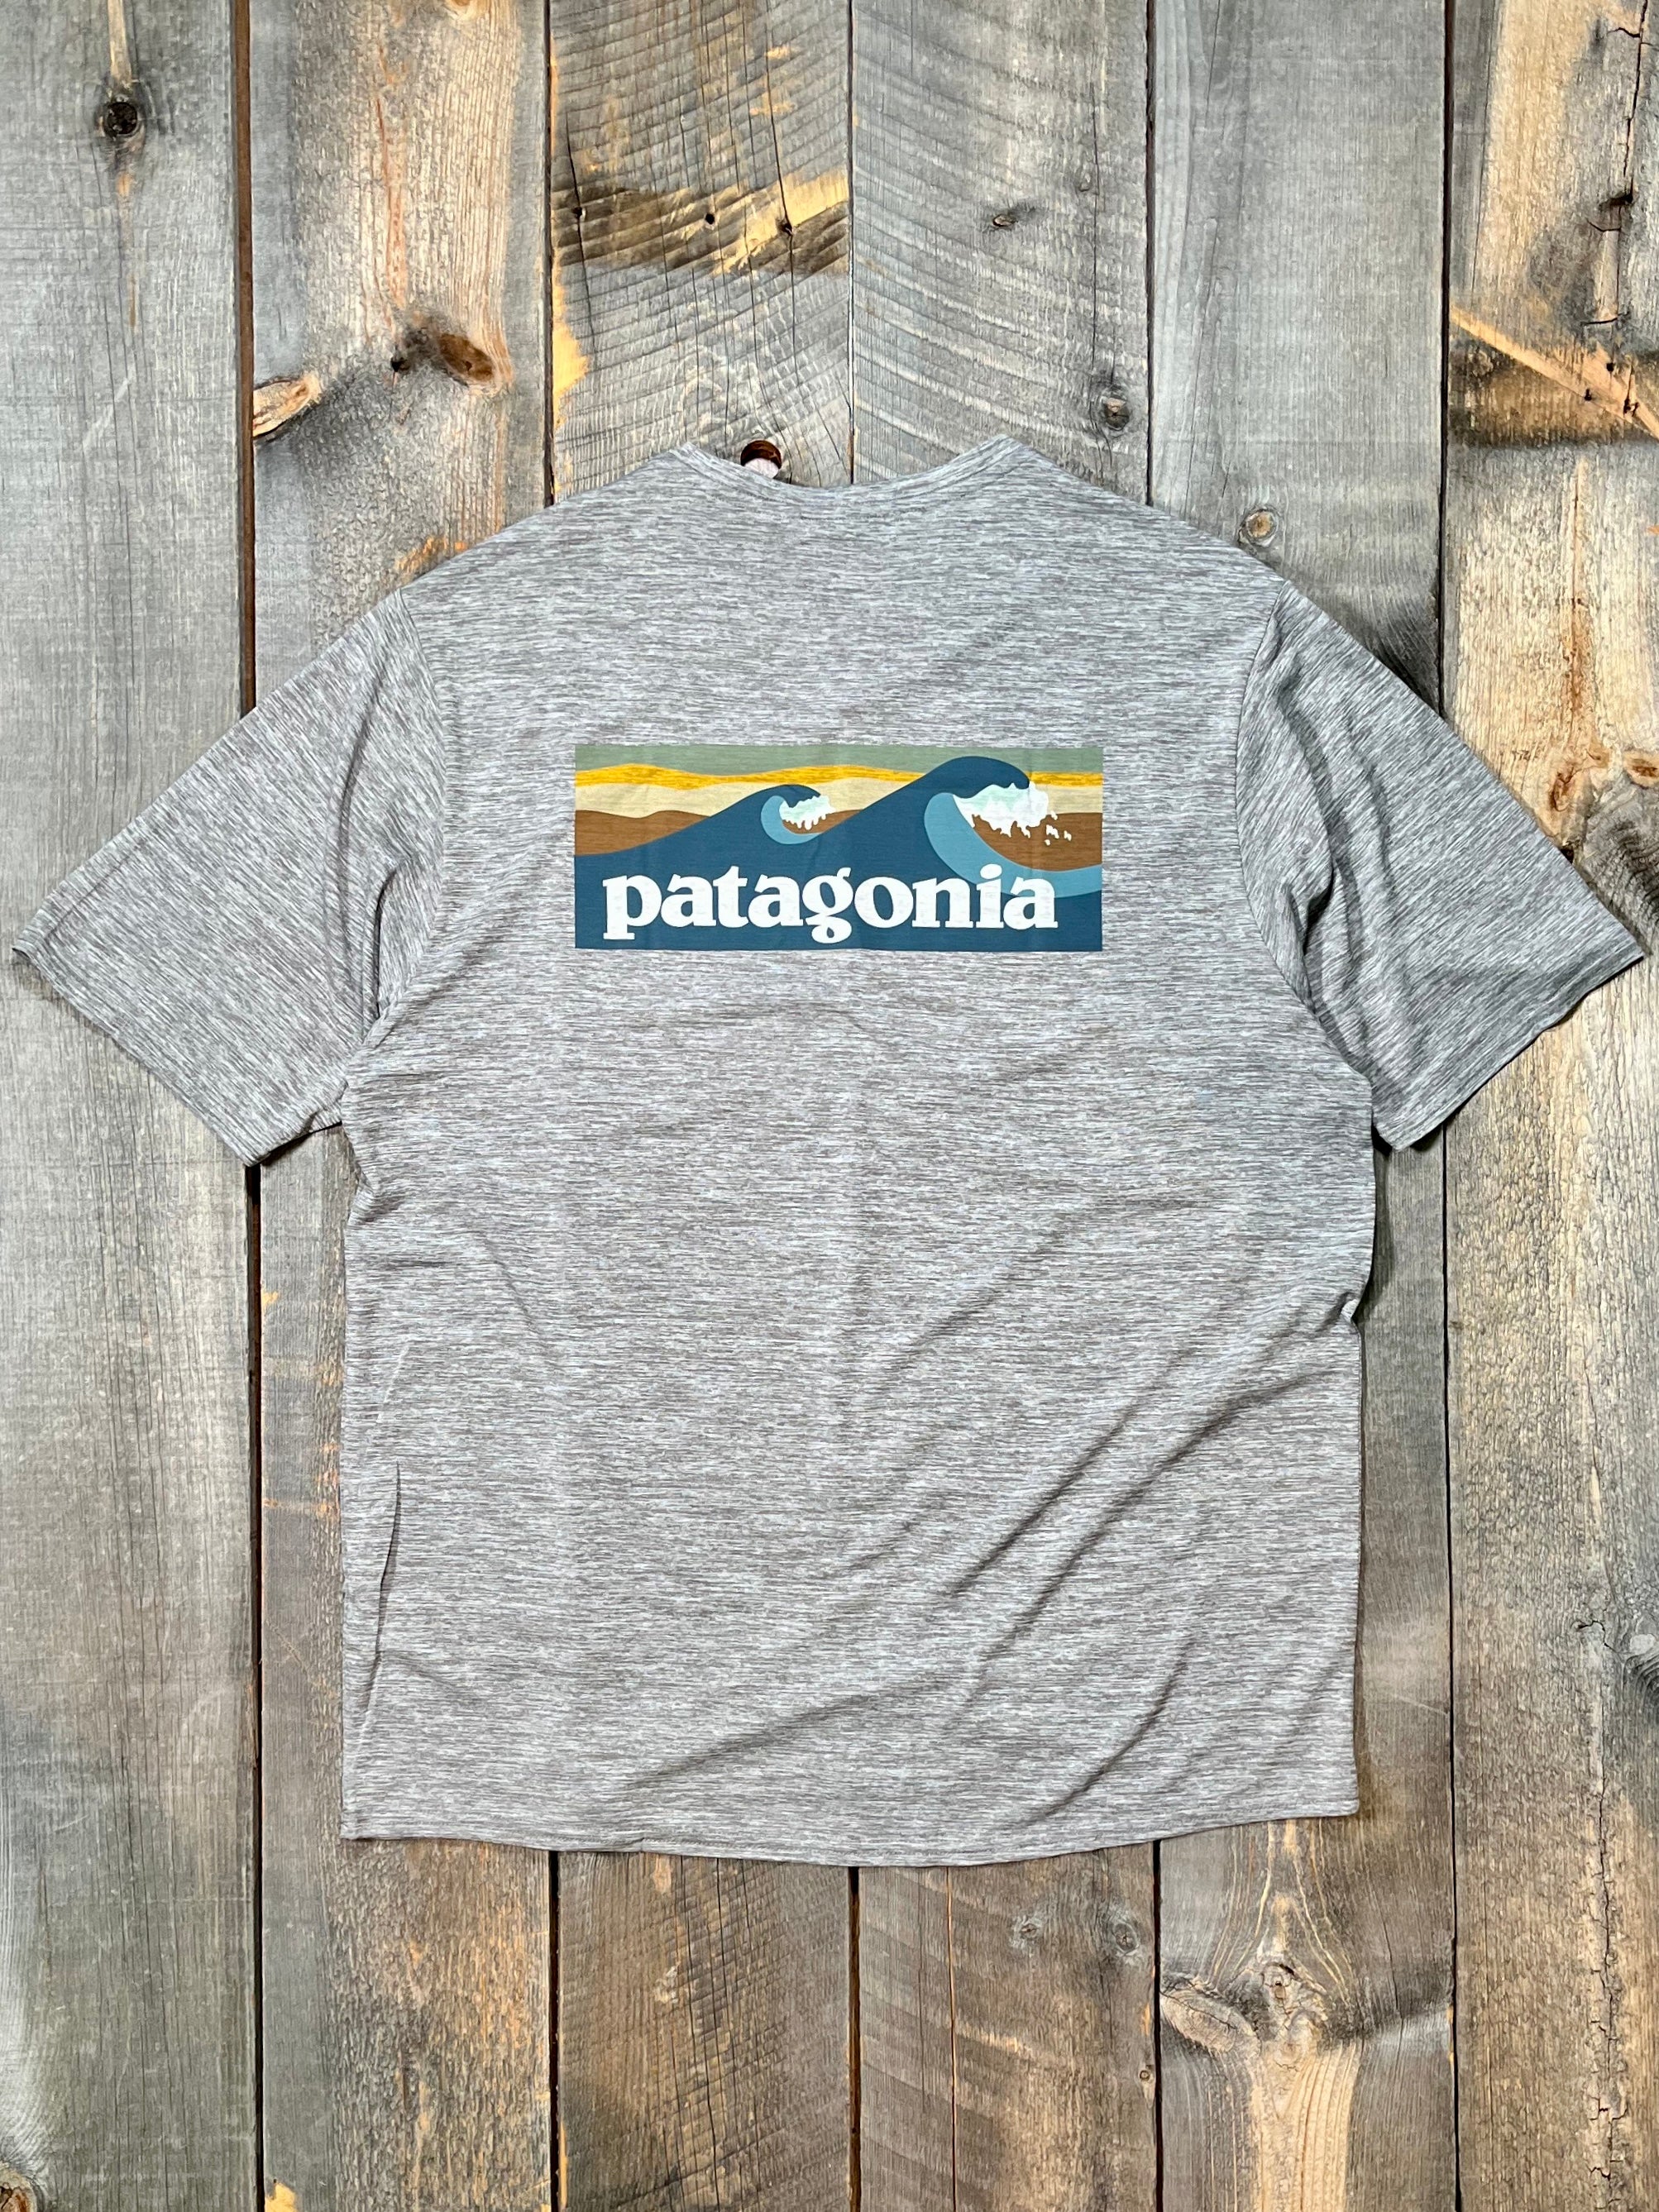 Patagonia – ASHER GOODS Co.